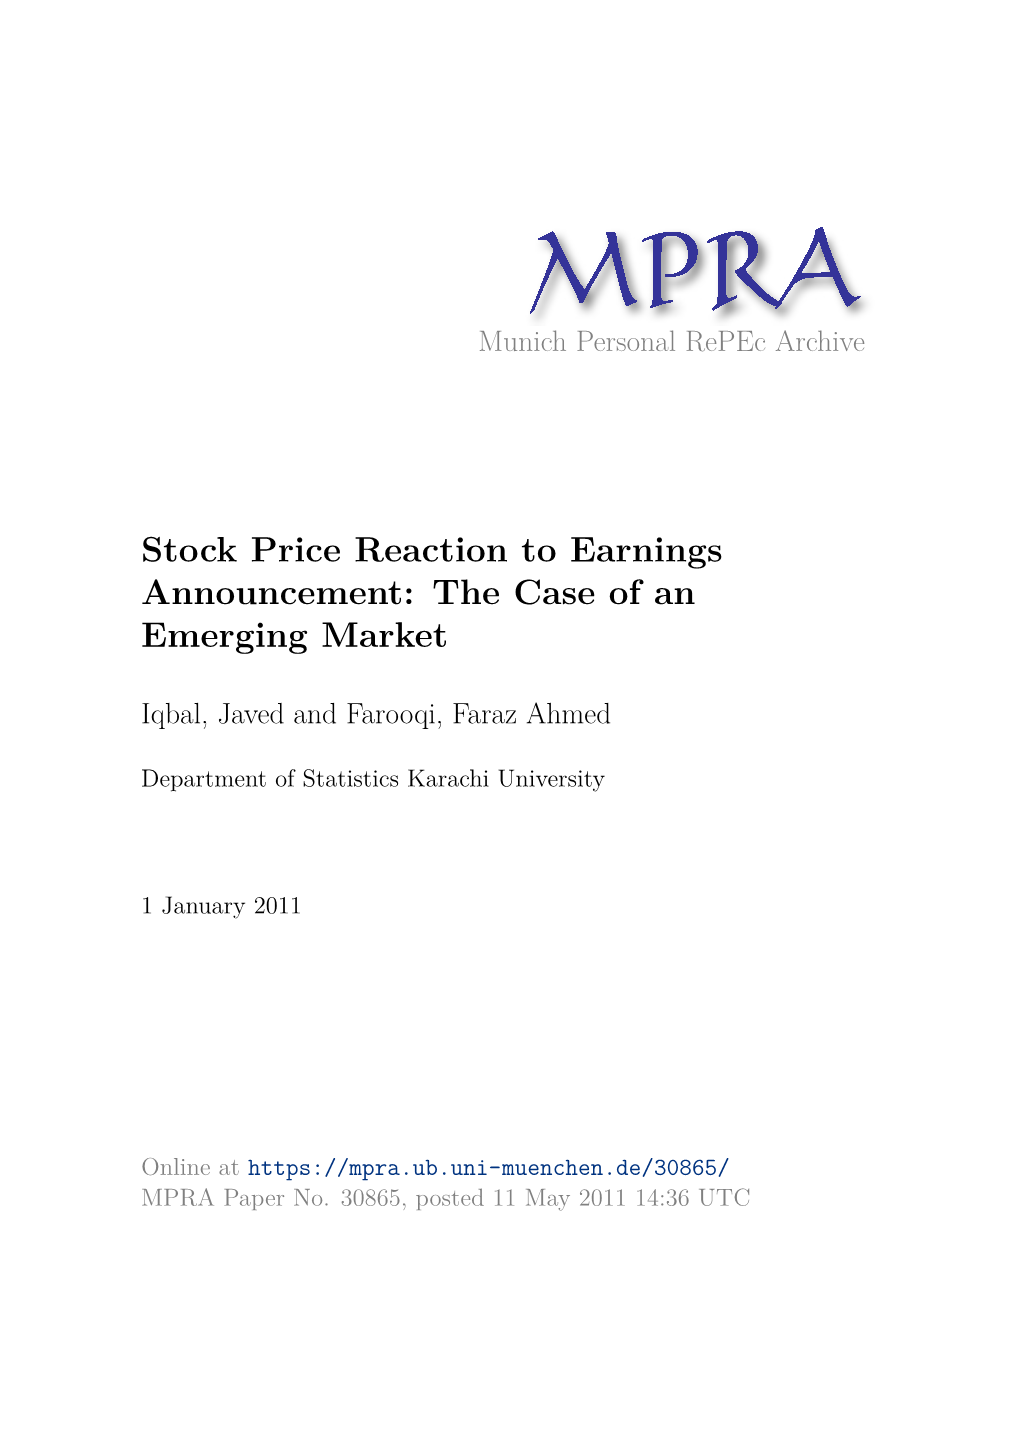 Stock Price Reaction to Earnings Announcement: the Case of an Emerging Market